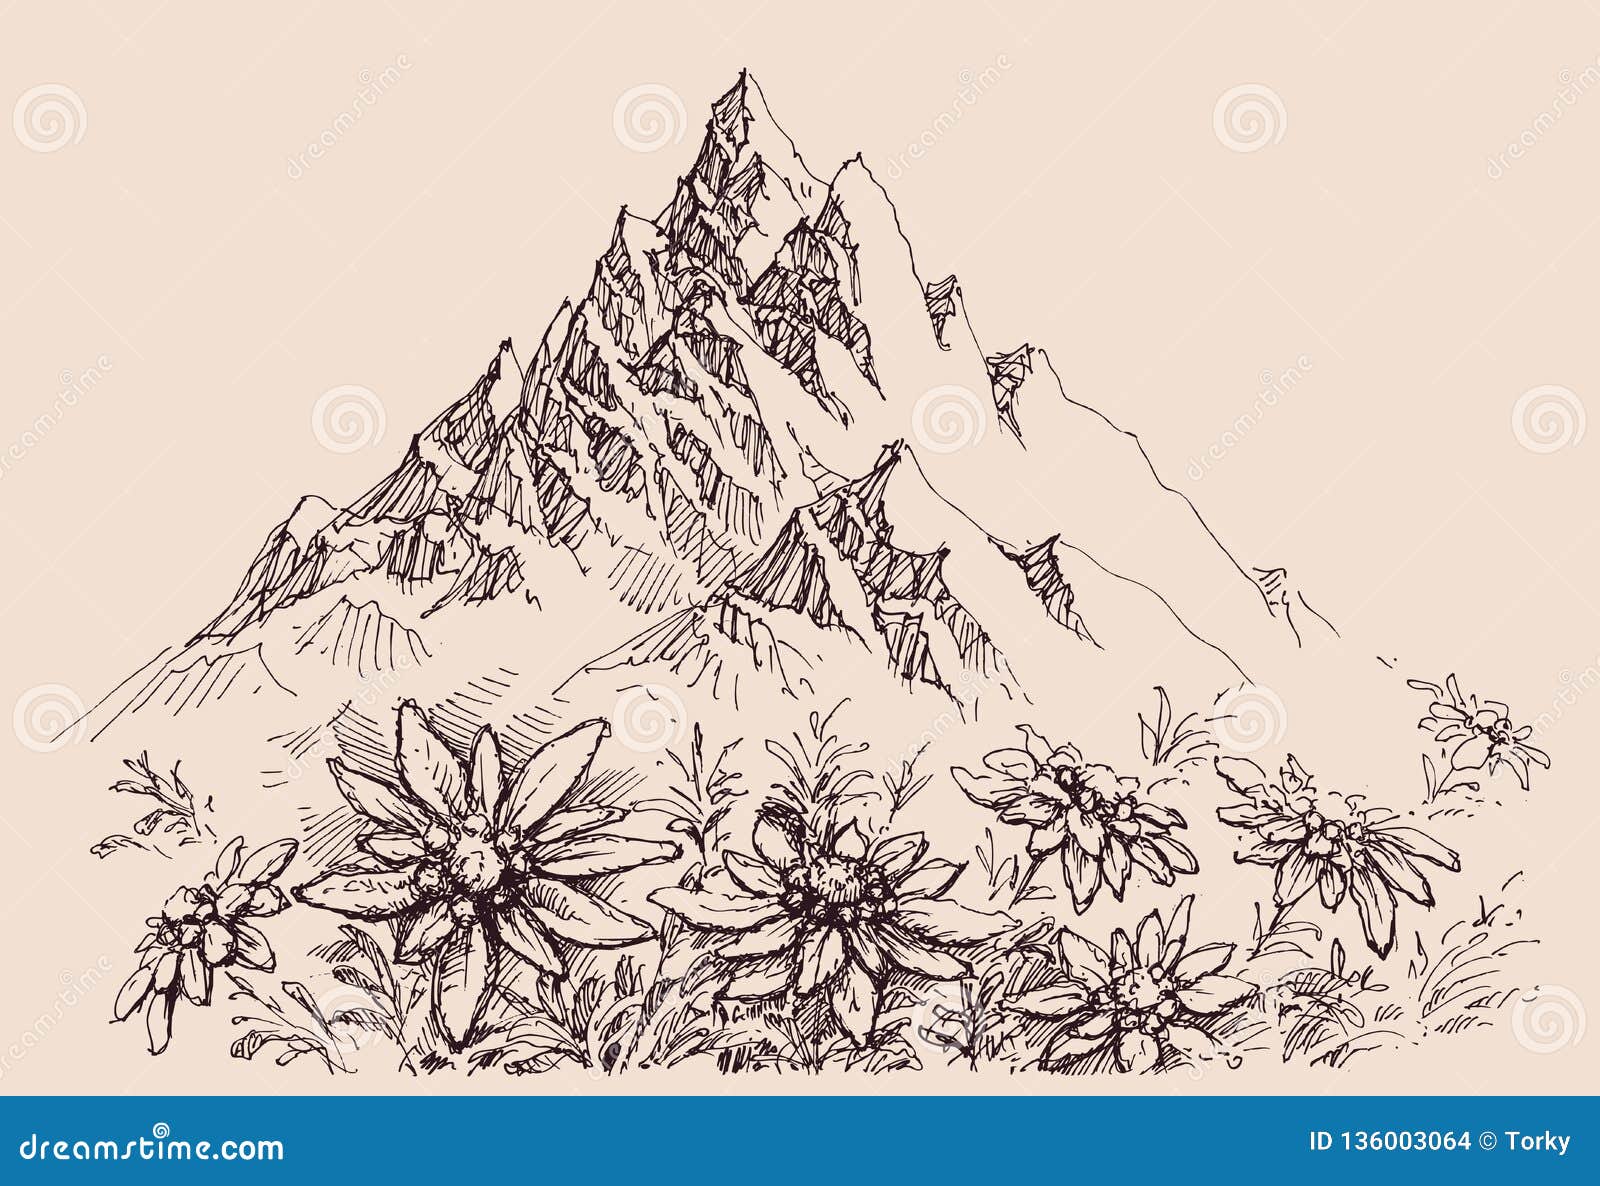 mountain range and edelweiss flowers